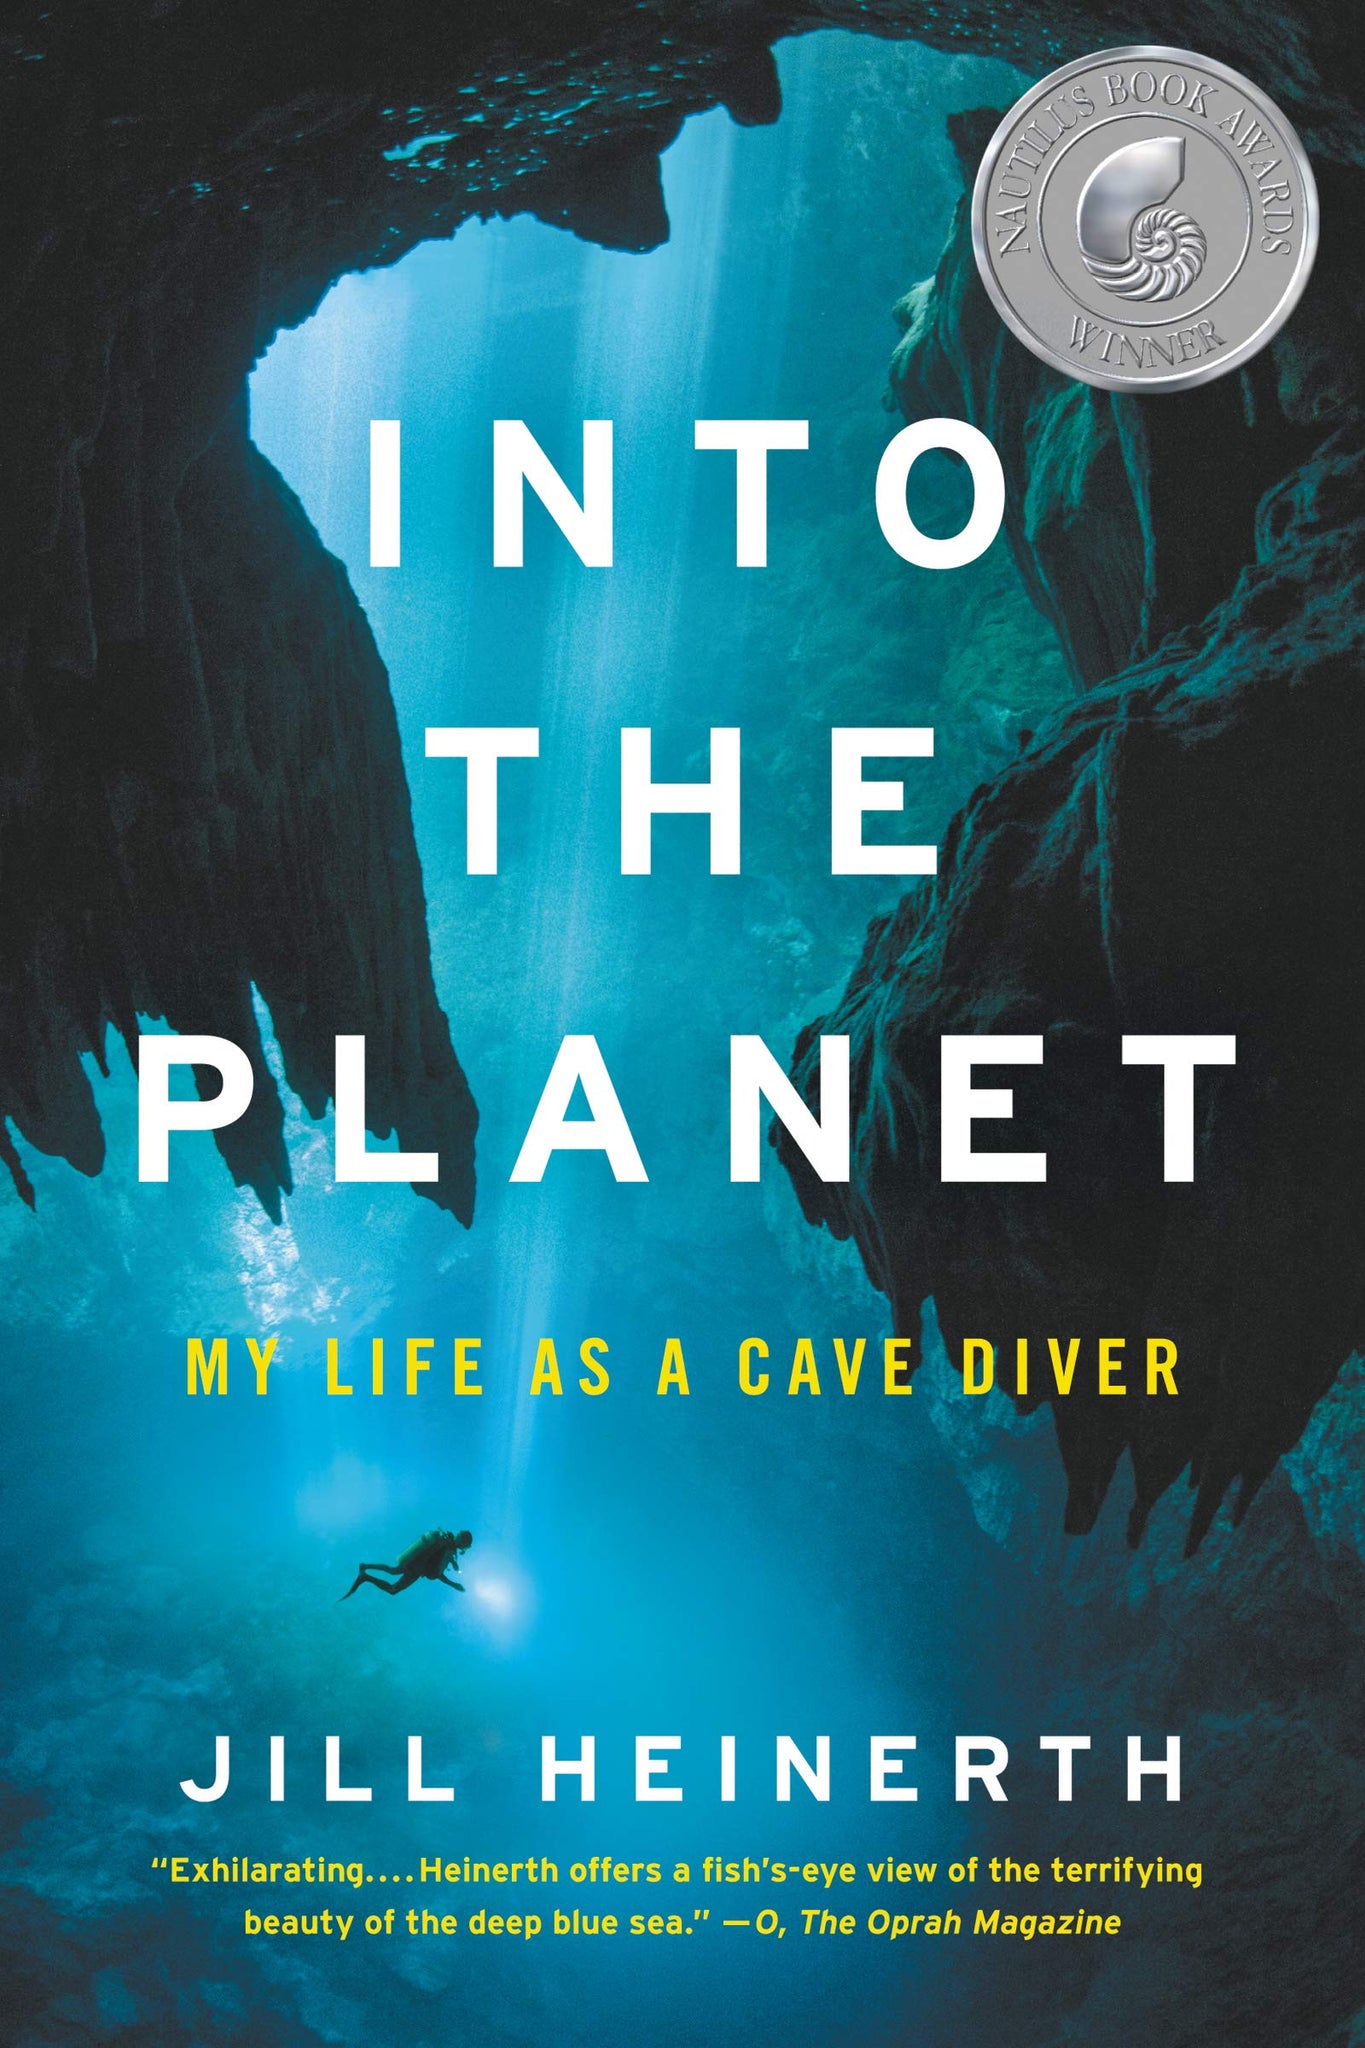 Into the Planet : My Life as a Cave Diver by Jill Heinerth